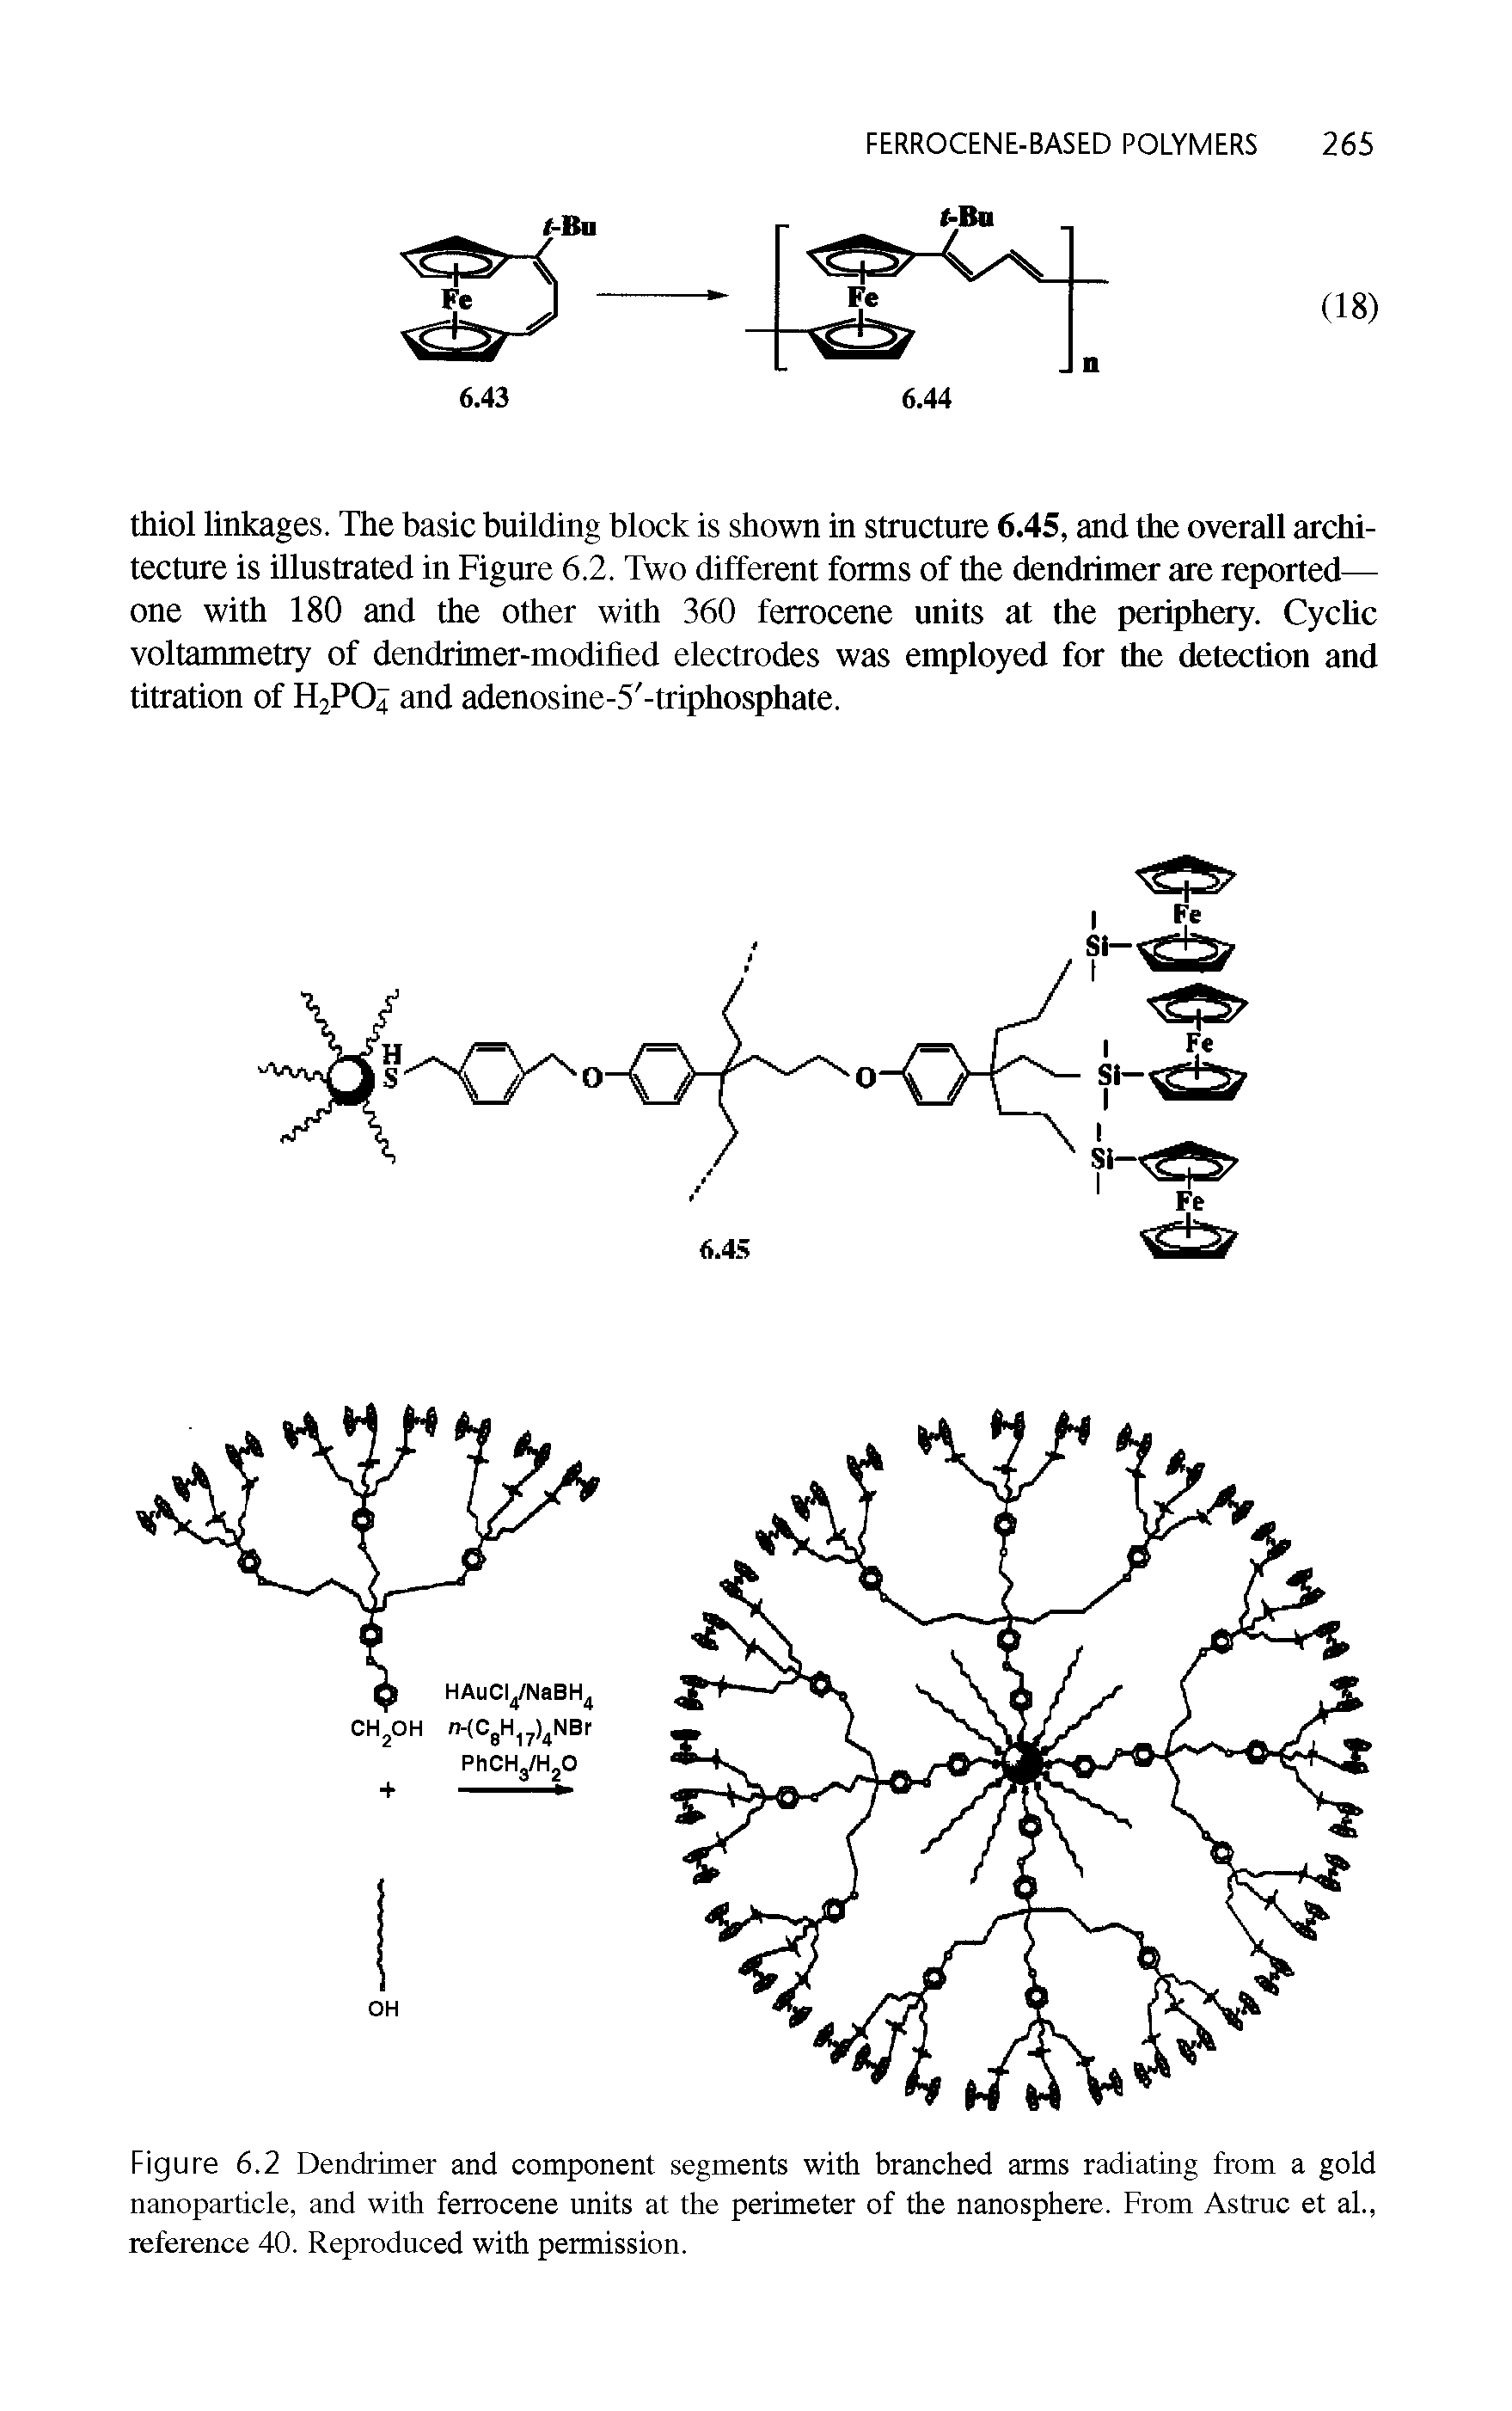 Figure 6.2 Dendrimer and component segments with branched arms radiating from a gold nanoparticle, and with ferrocene units at the perimeter of the nanosphere. From Astruc et al., reference 40. Reproduced with permission.